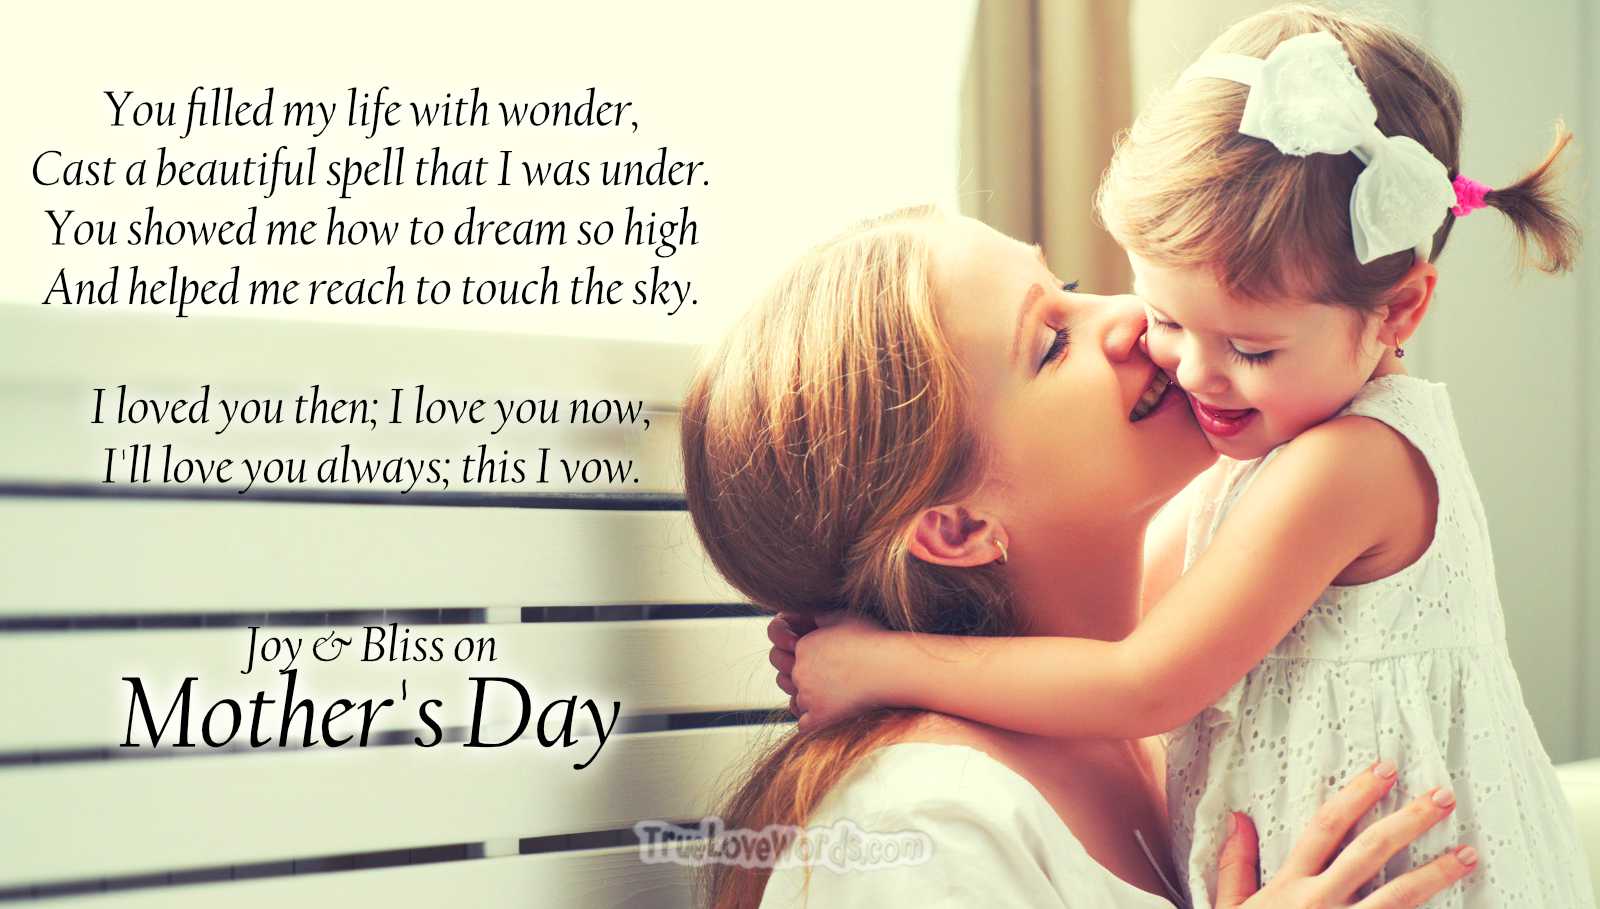 60 Mother's Day Messages Inspiring, Heartfelt and Funny